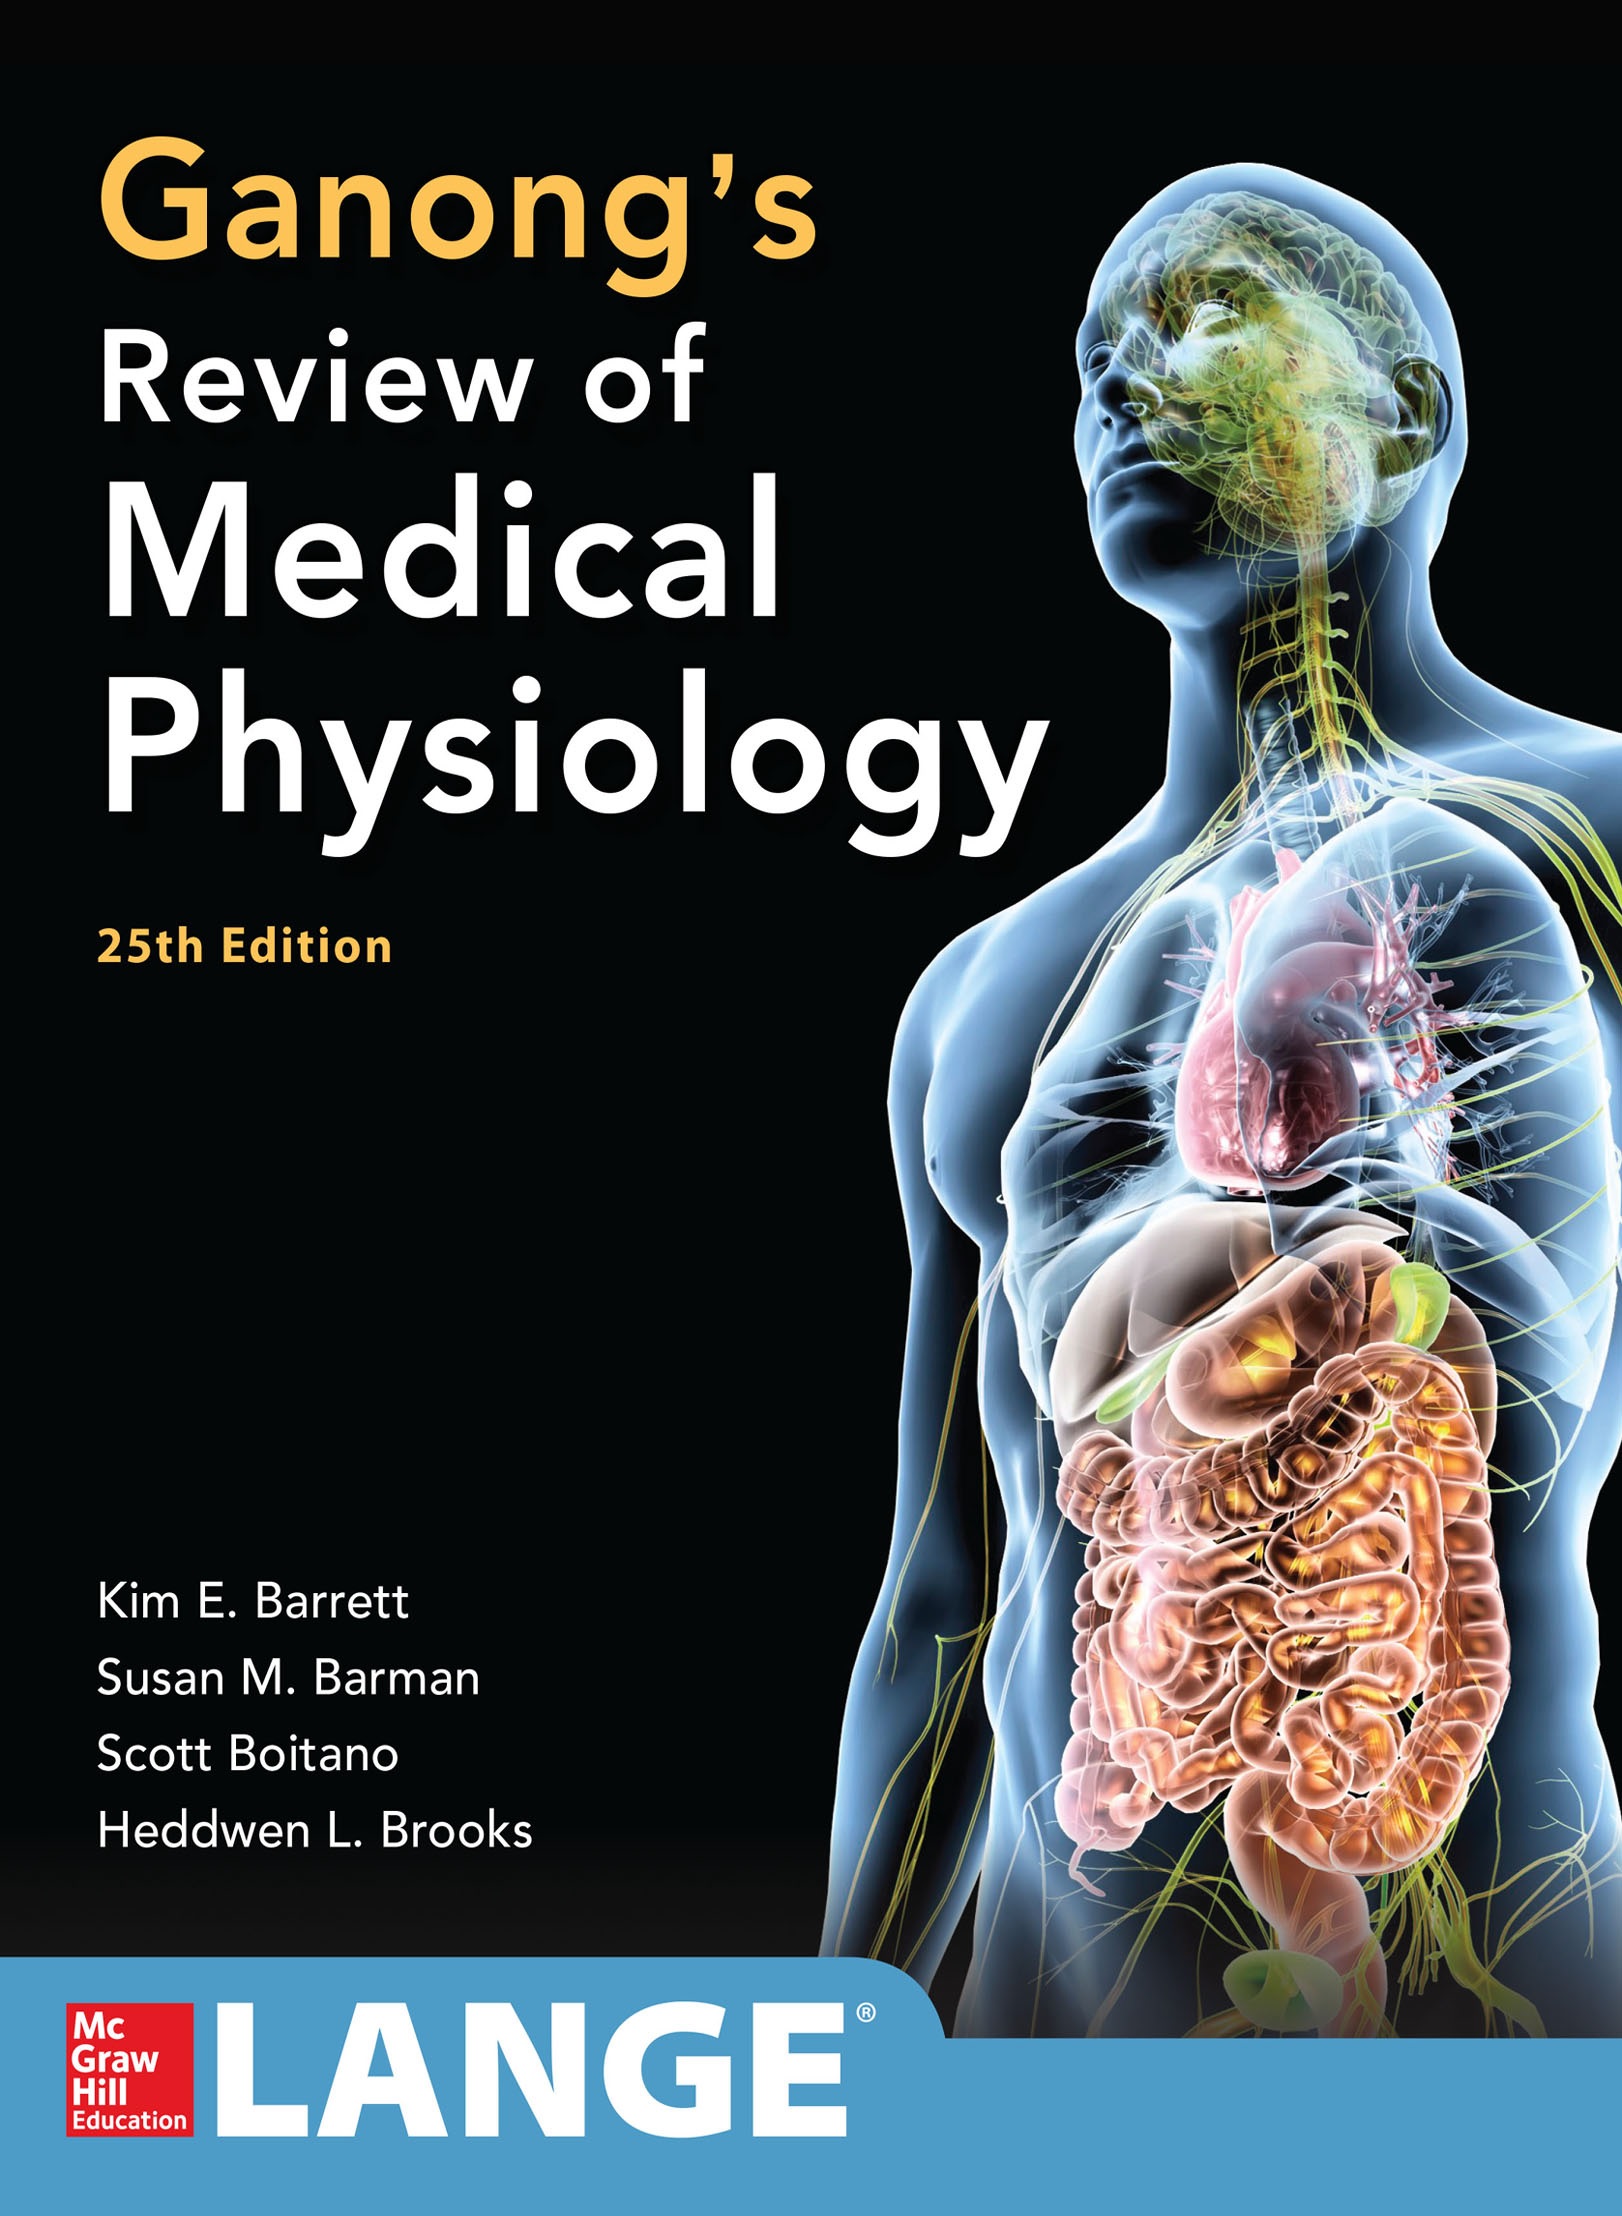 Ganong’s Review of Medical Physiology 25th EDITION pdf book free download